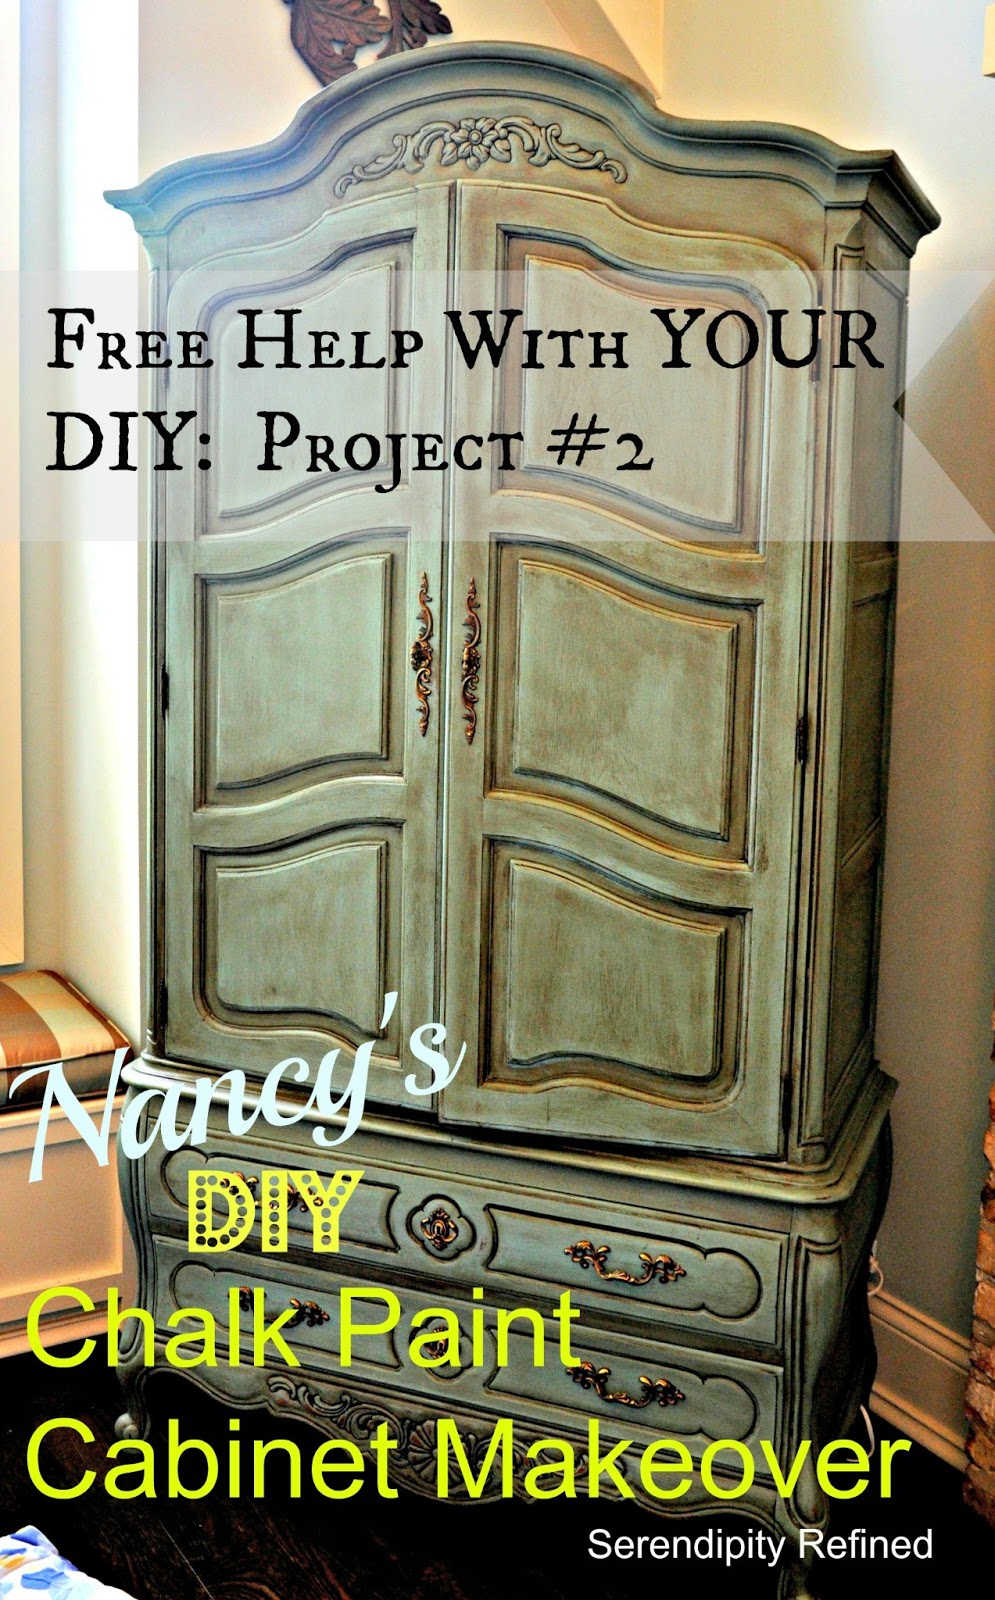 Serendipity Refined Blog: Free Help with YOUR DIY Project ...